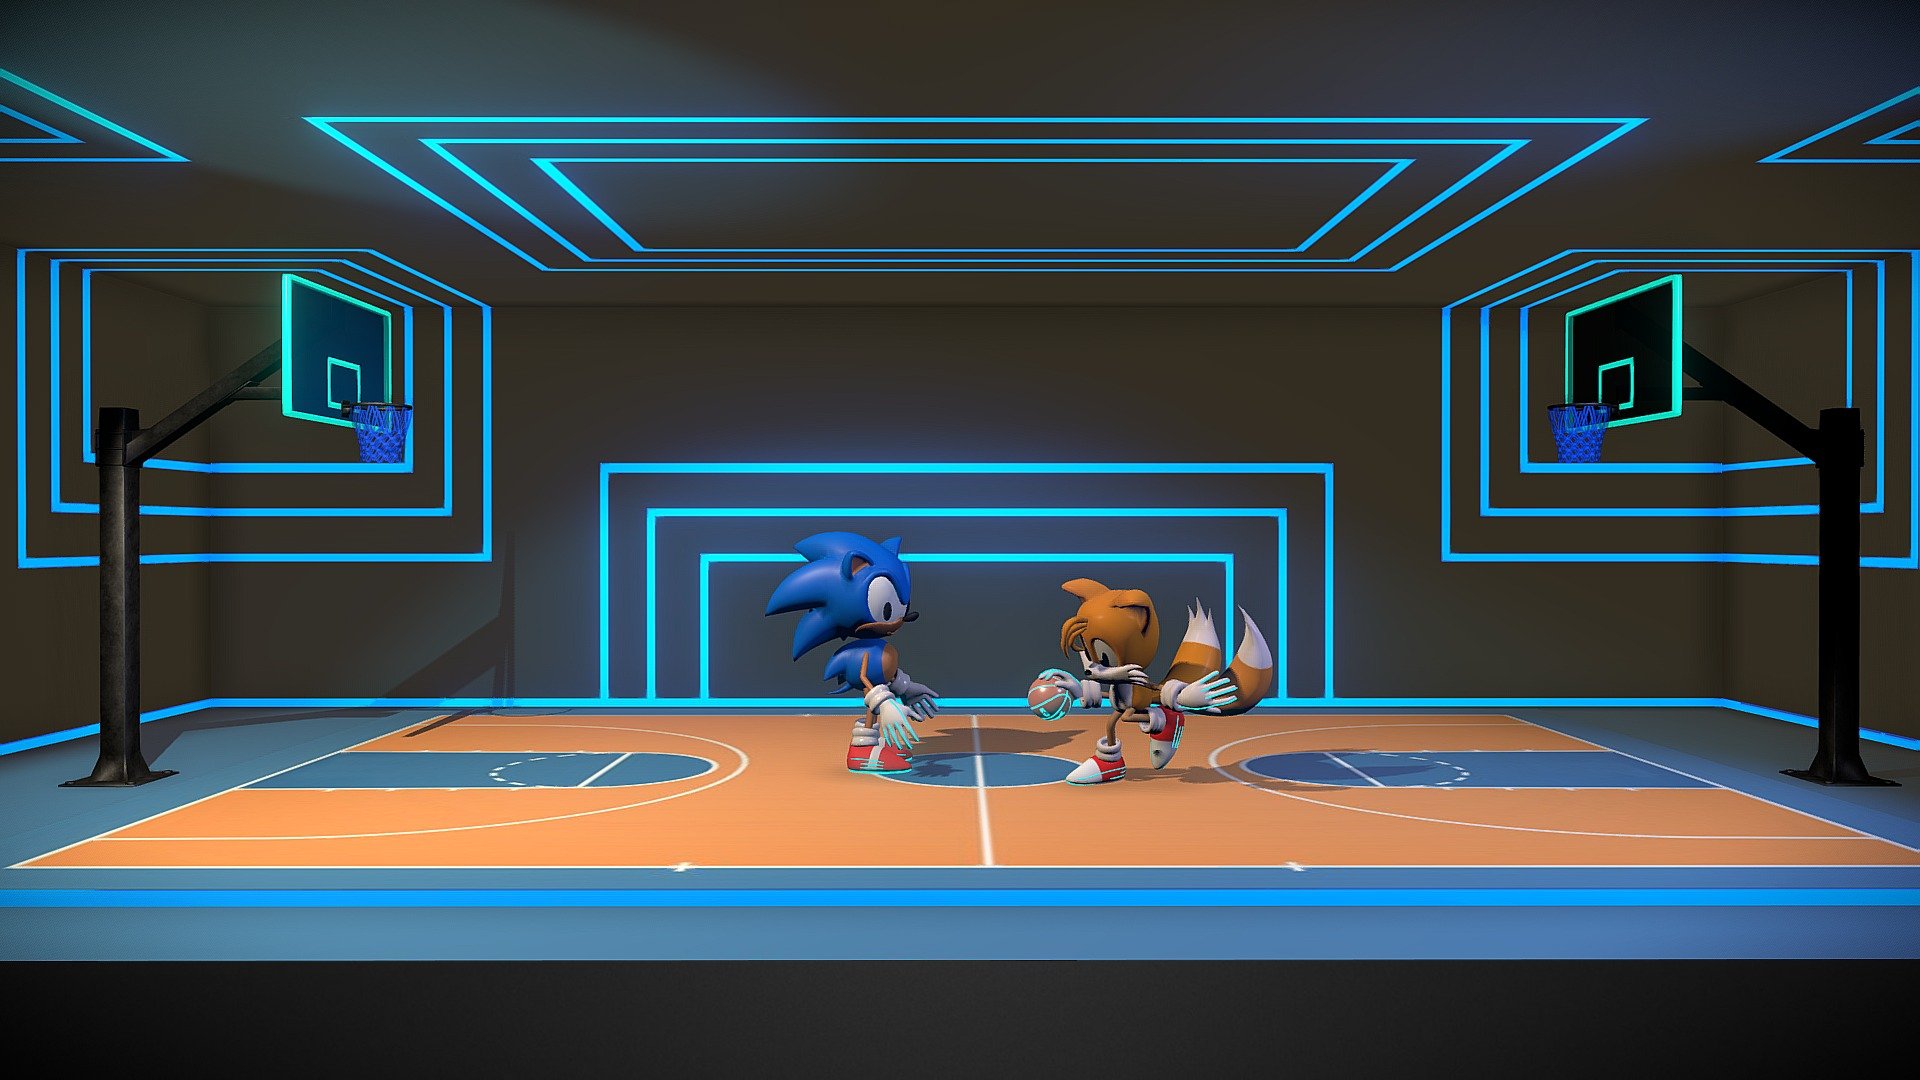 Sonic and Tails playing basketball. Animation